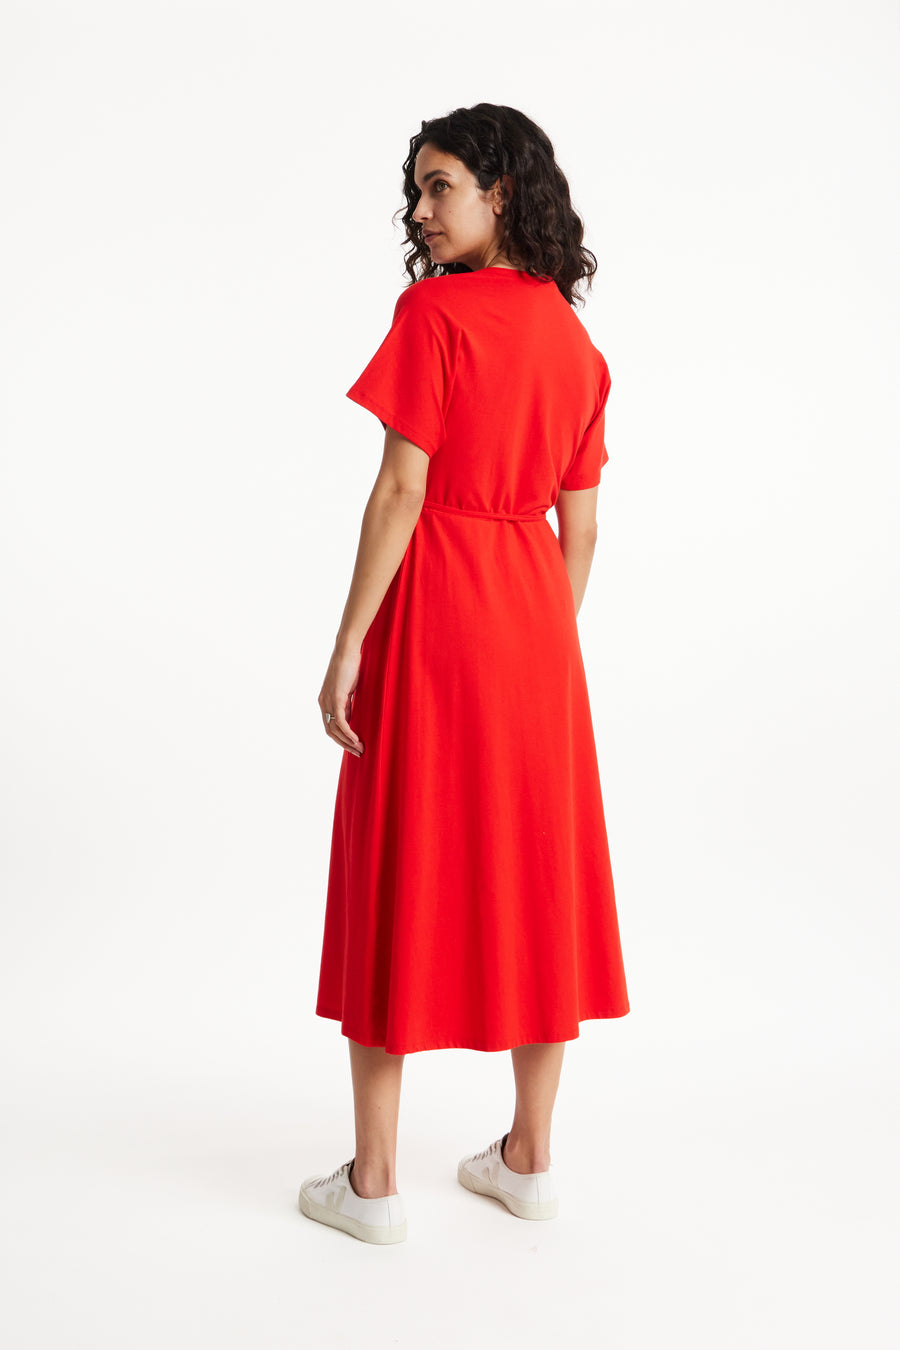 People Tree Fair Trade, Ethical & Sustainable Leora Wrap Dress in Red 95% organic certified cotton, 5% elastane